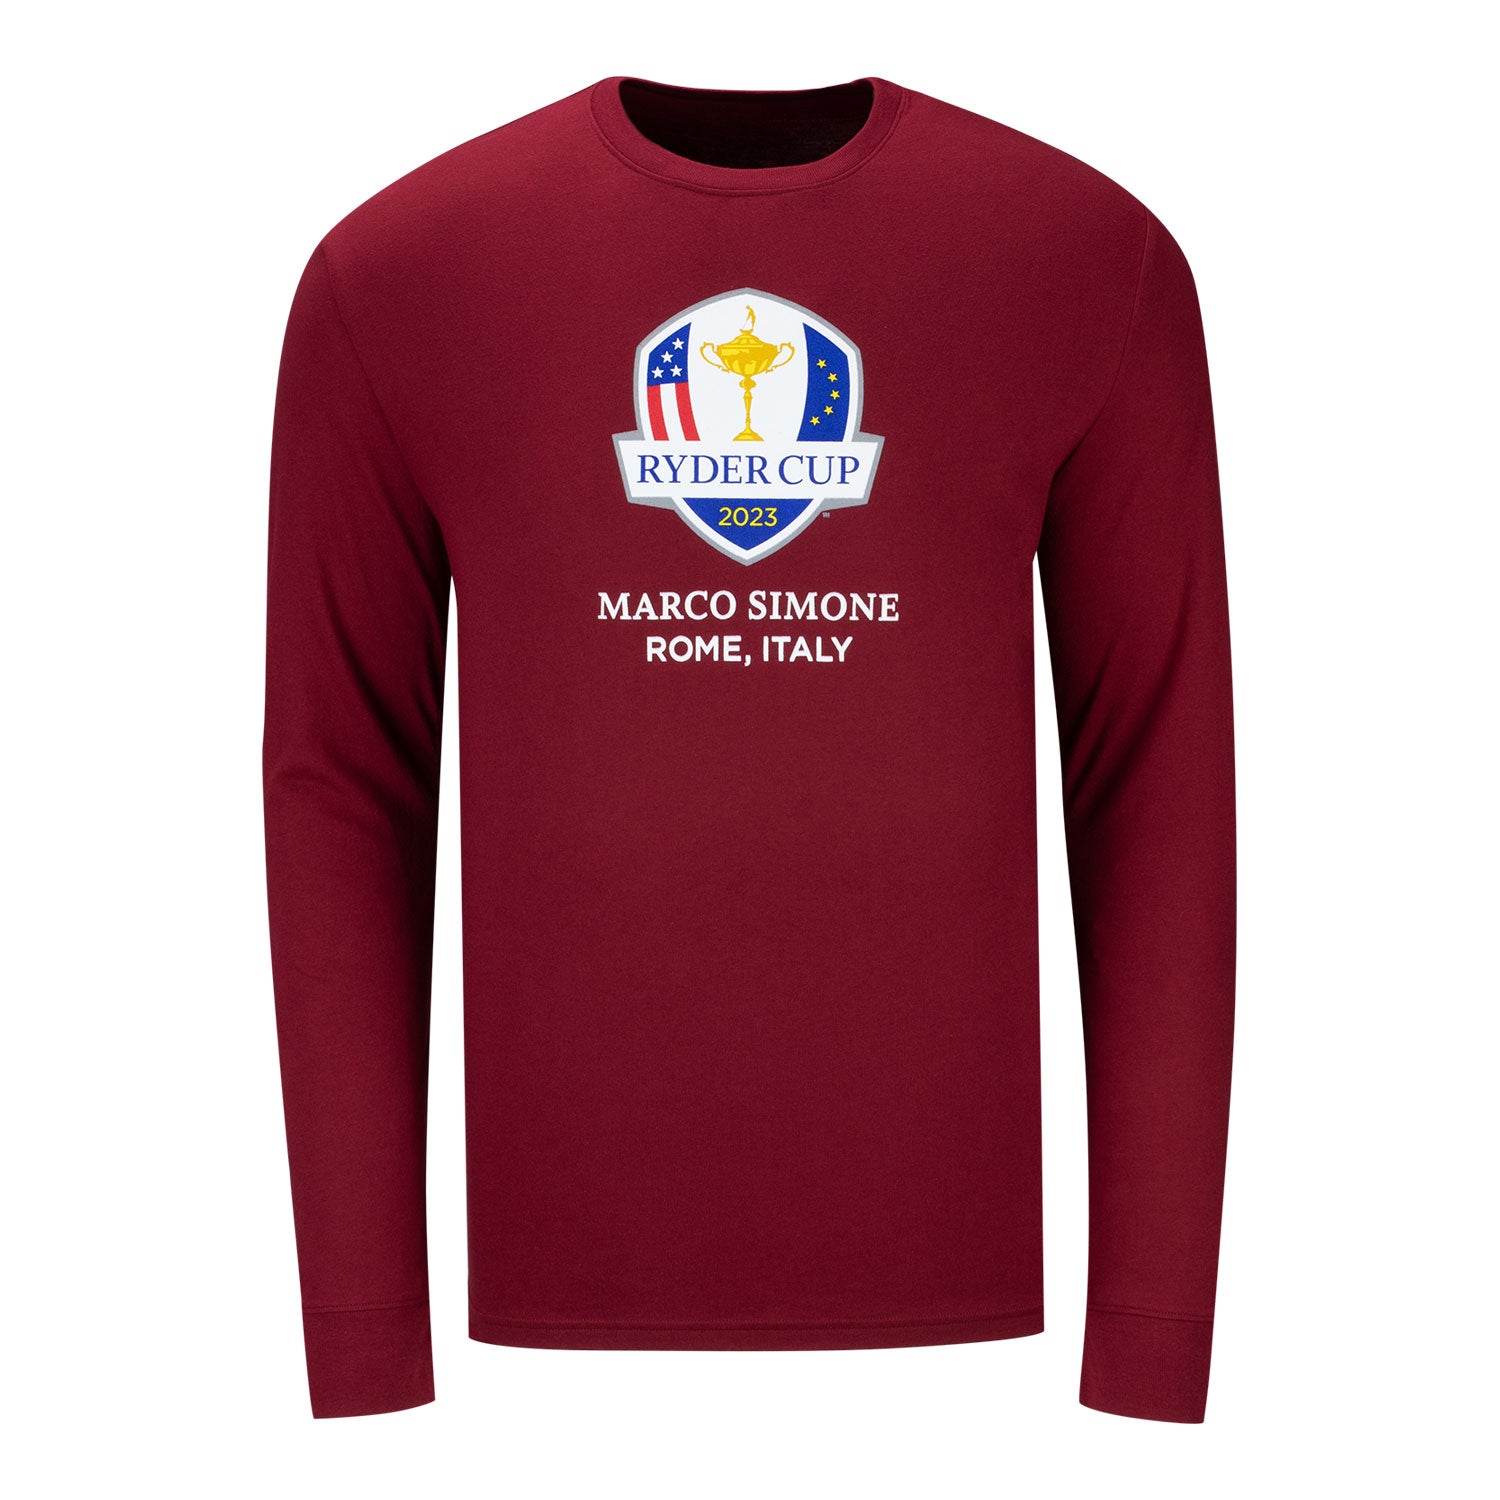 Under Armour 2023 Ryder Cup Performance Cotton T-Shirt in Red- Front View